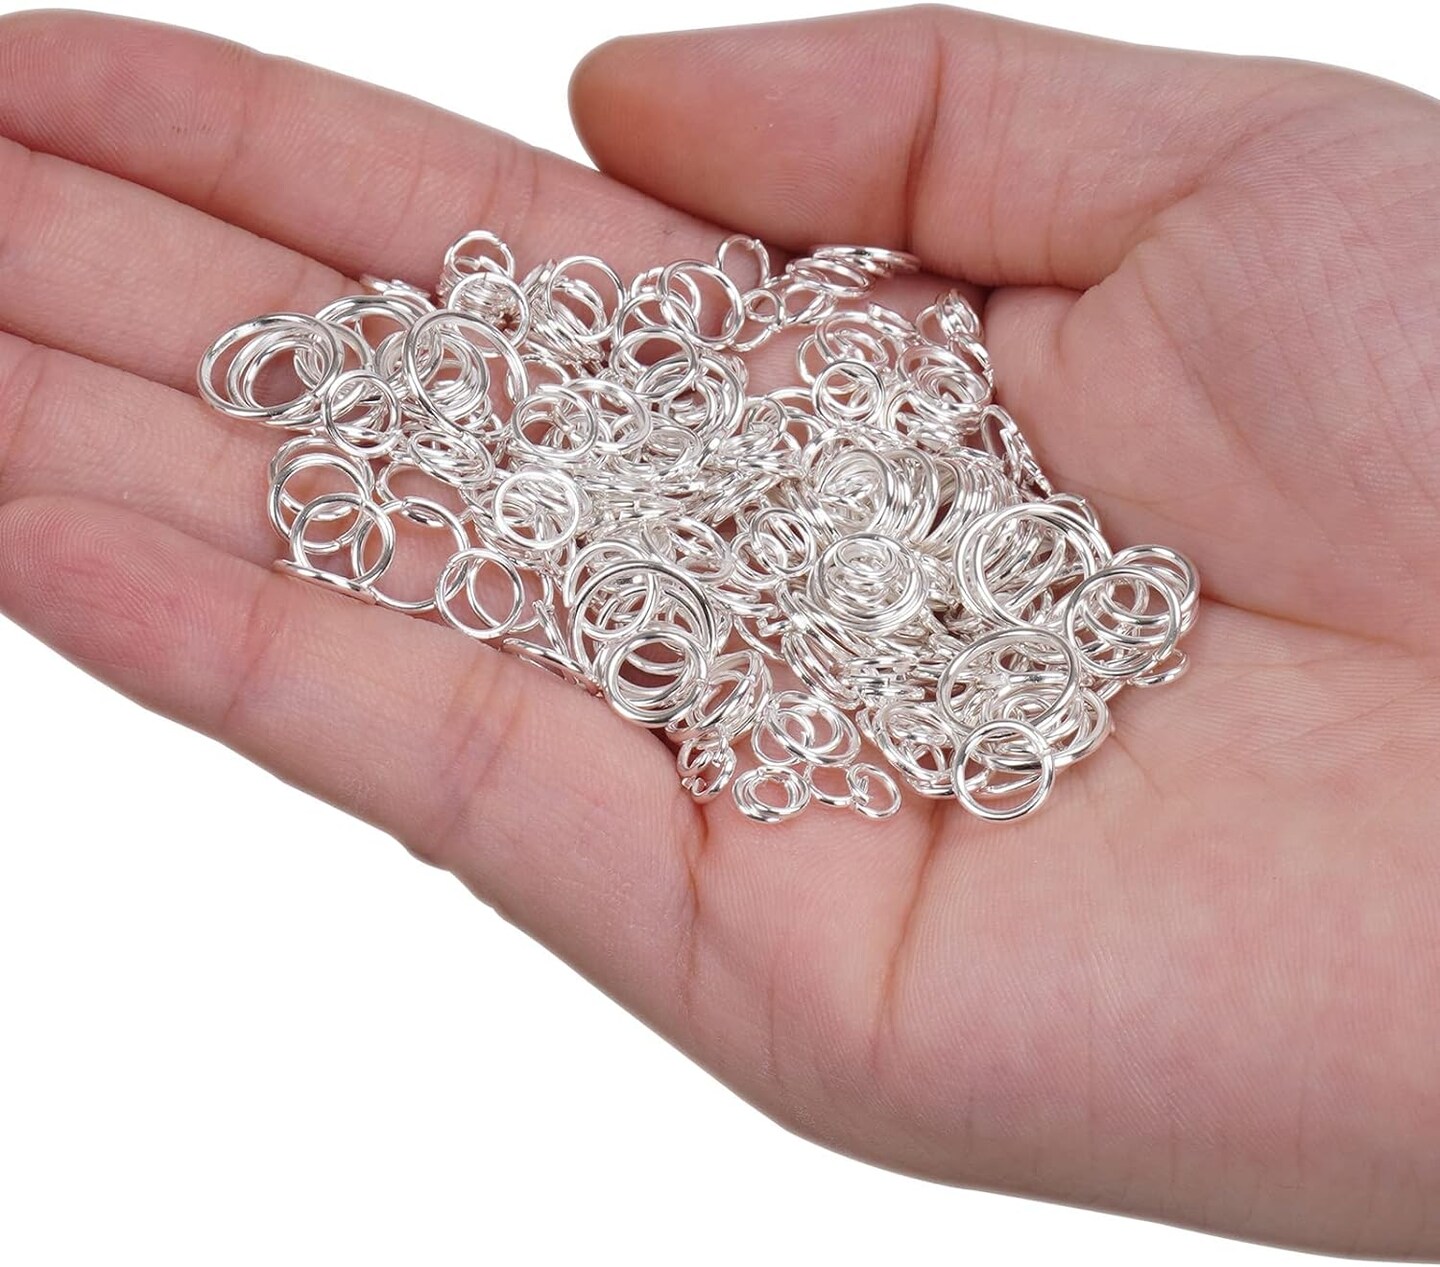 2300pc Assorted Silver Jump Rings for Crafts Jewelry Making Supplies - 7 Sizes (3mm to 10mm) DIY Open Jump Ring Hoops for Chain, Necklaces Links, Bracelets, Earrings, Keychain, Split ring for Crafting